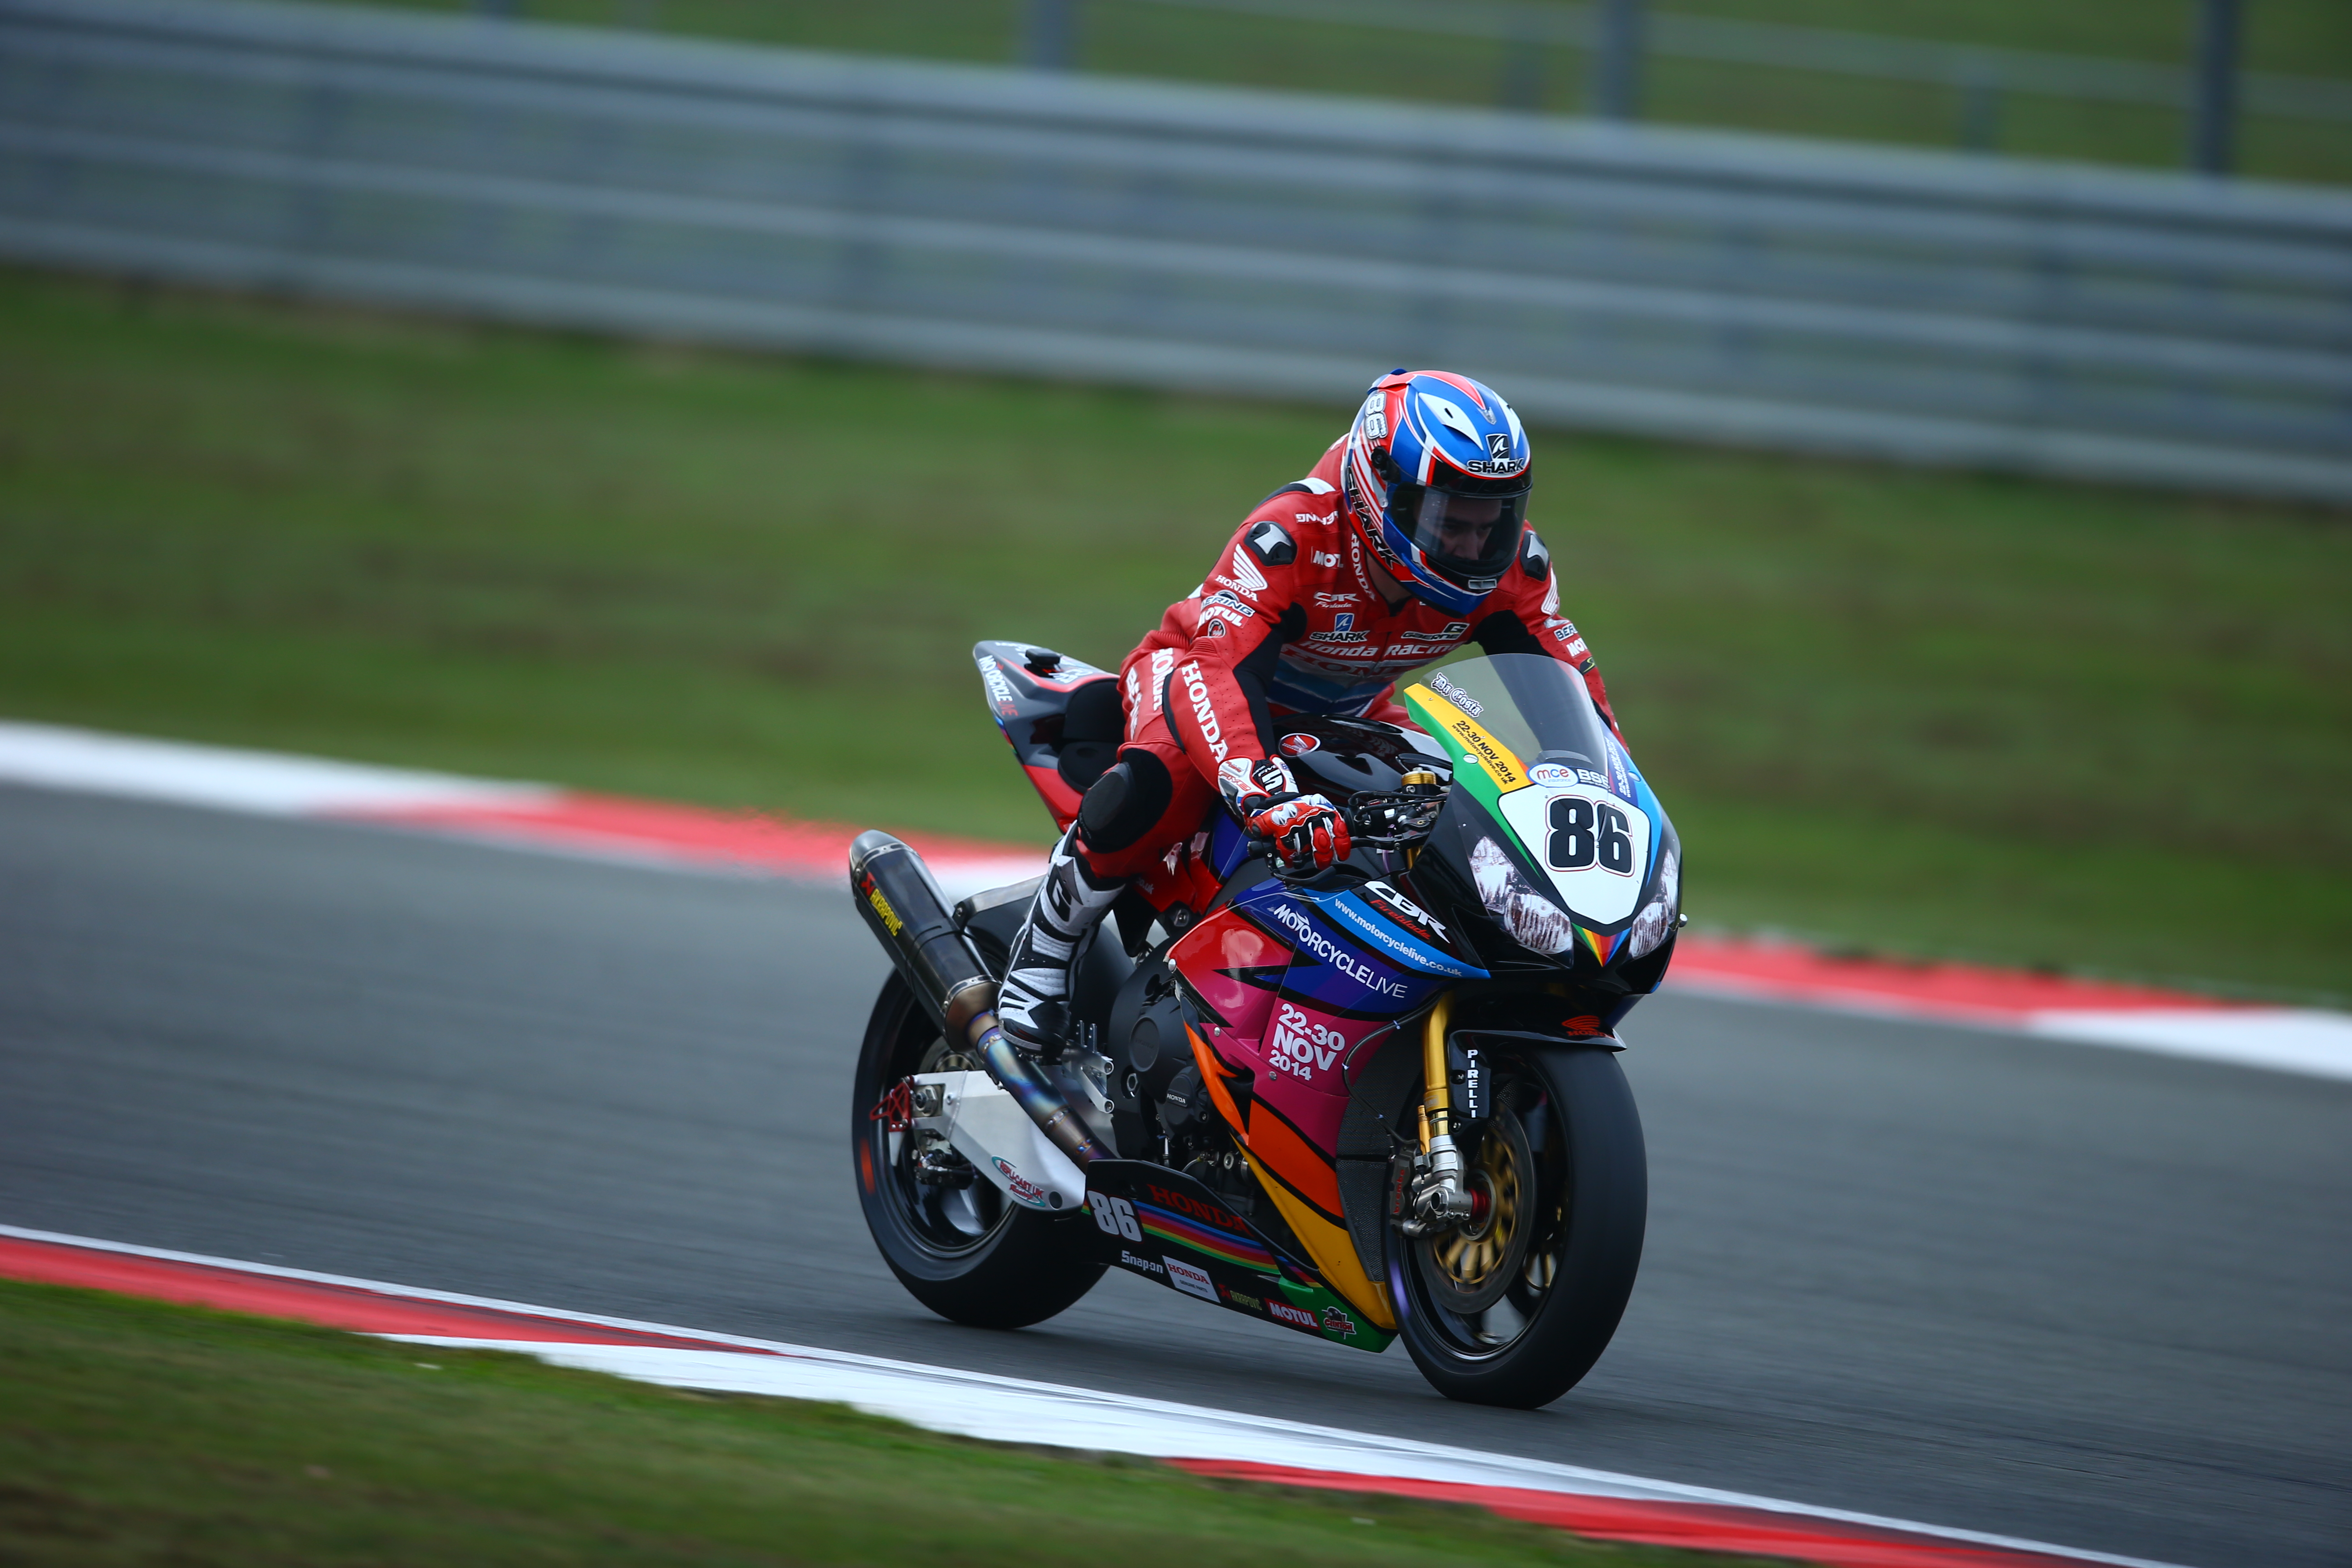 Motorcycle Live livery Fireblade to race at Silverstone